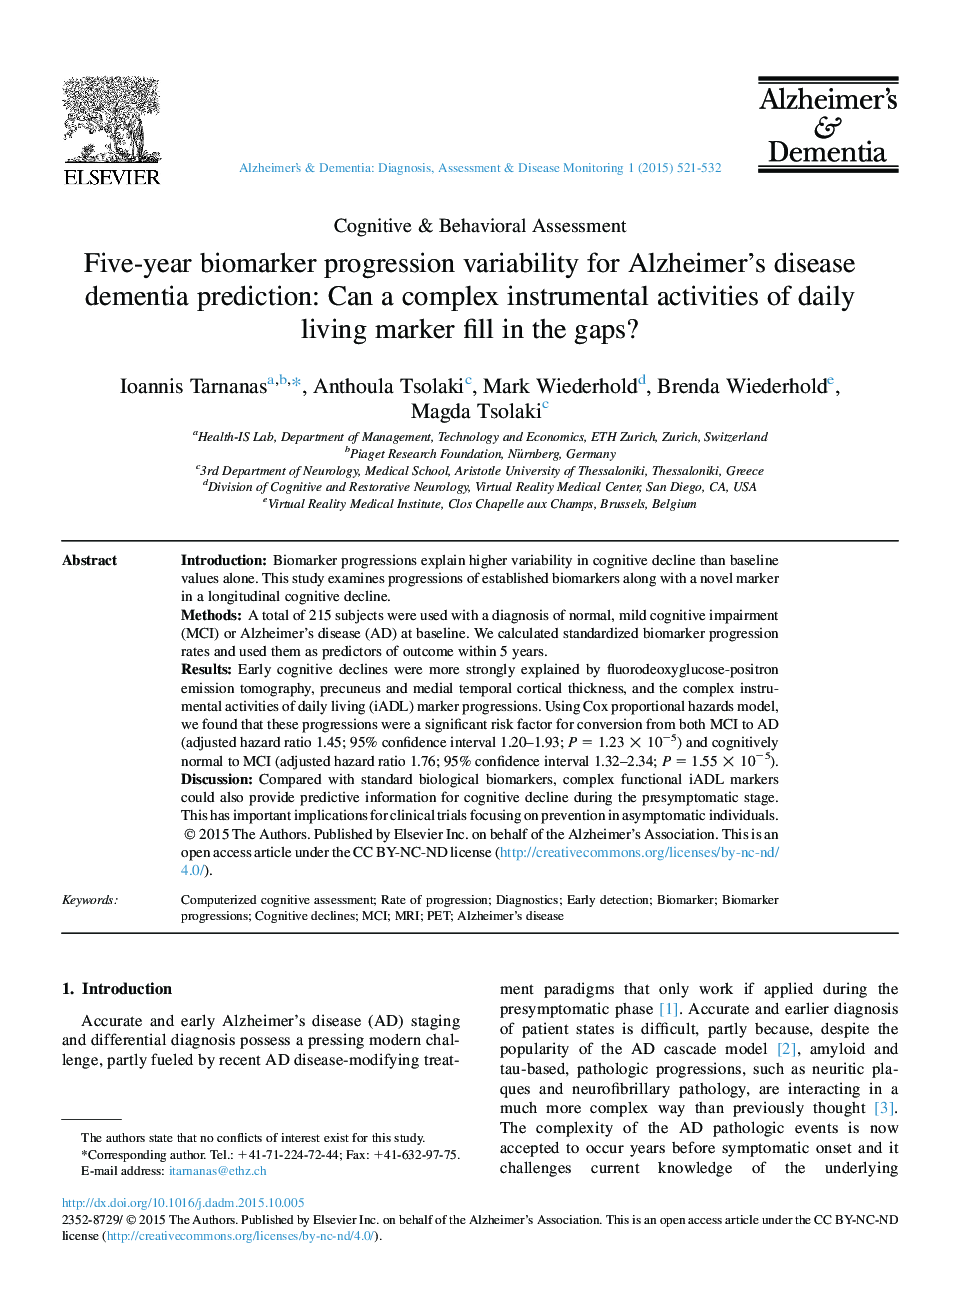 Five-year biomarker progression variability for Alzheimer's disease dementia prediction: Can a complex instrumental activities of daily living marker fill in the gaps? 